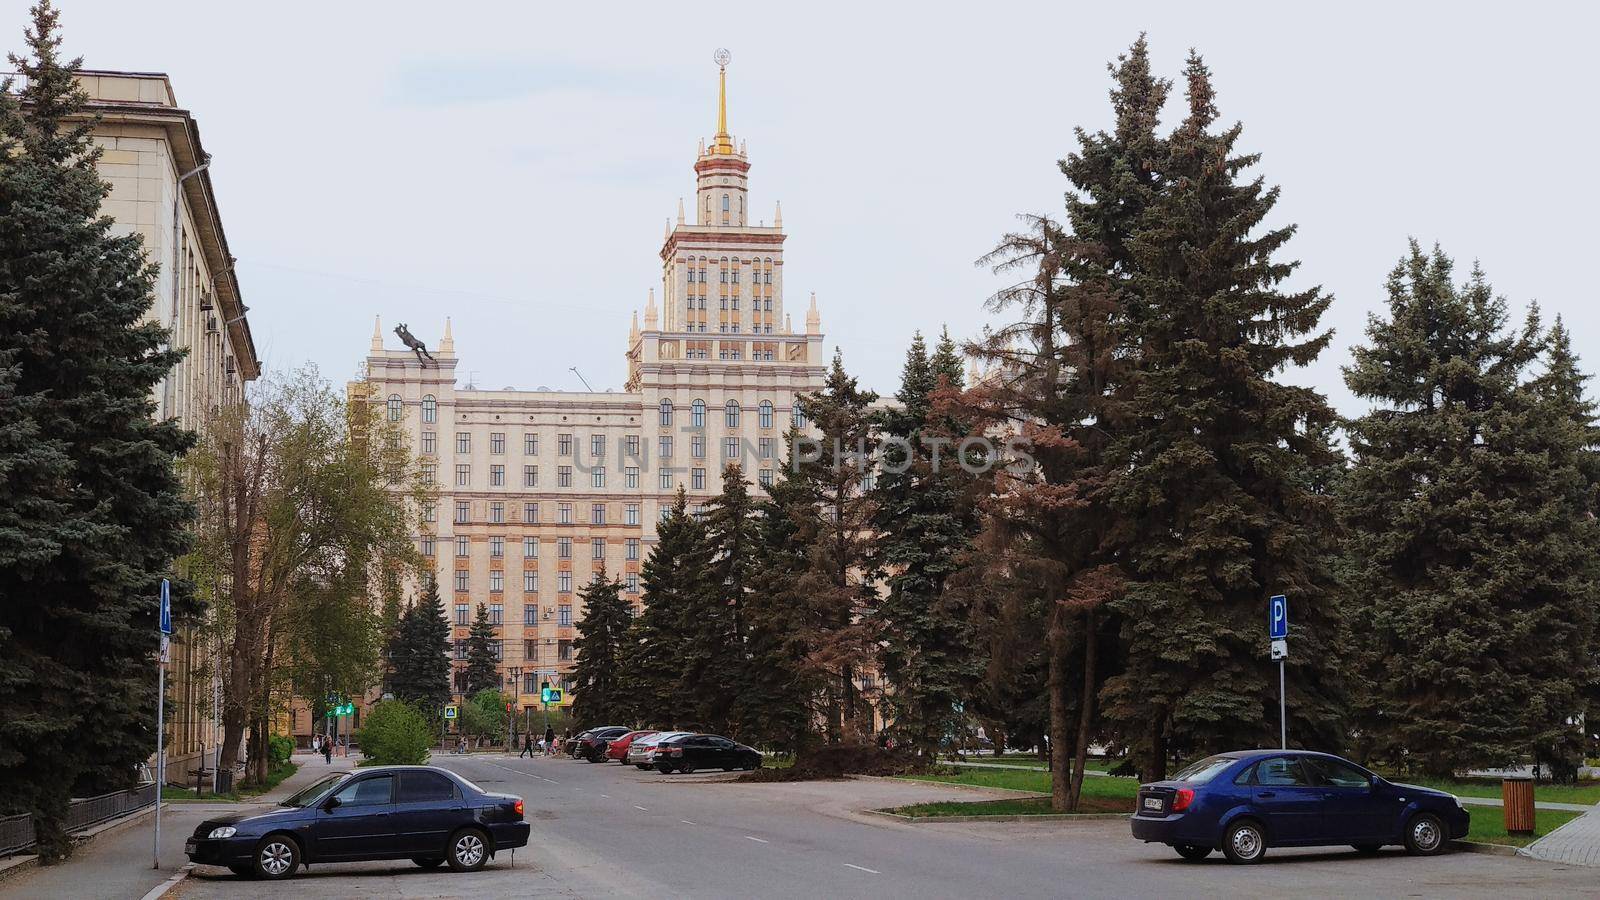 A road and autos and a large number of fir trees with a Soviet building